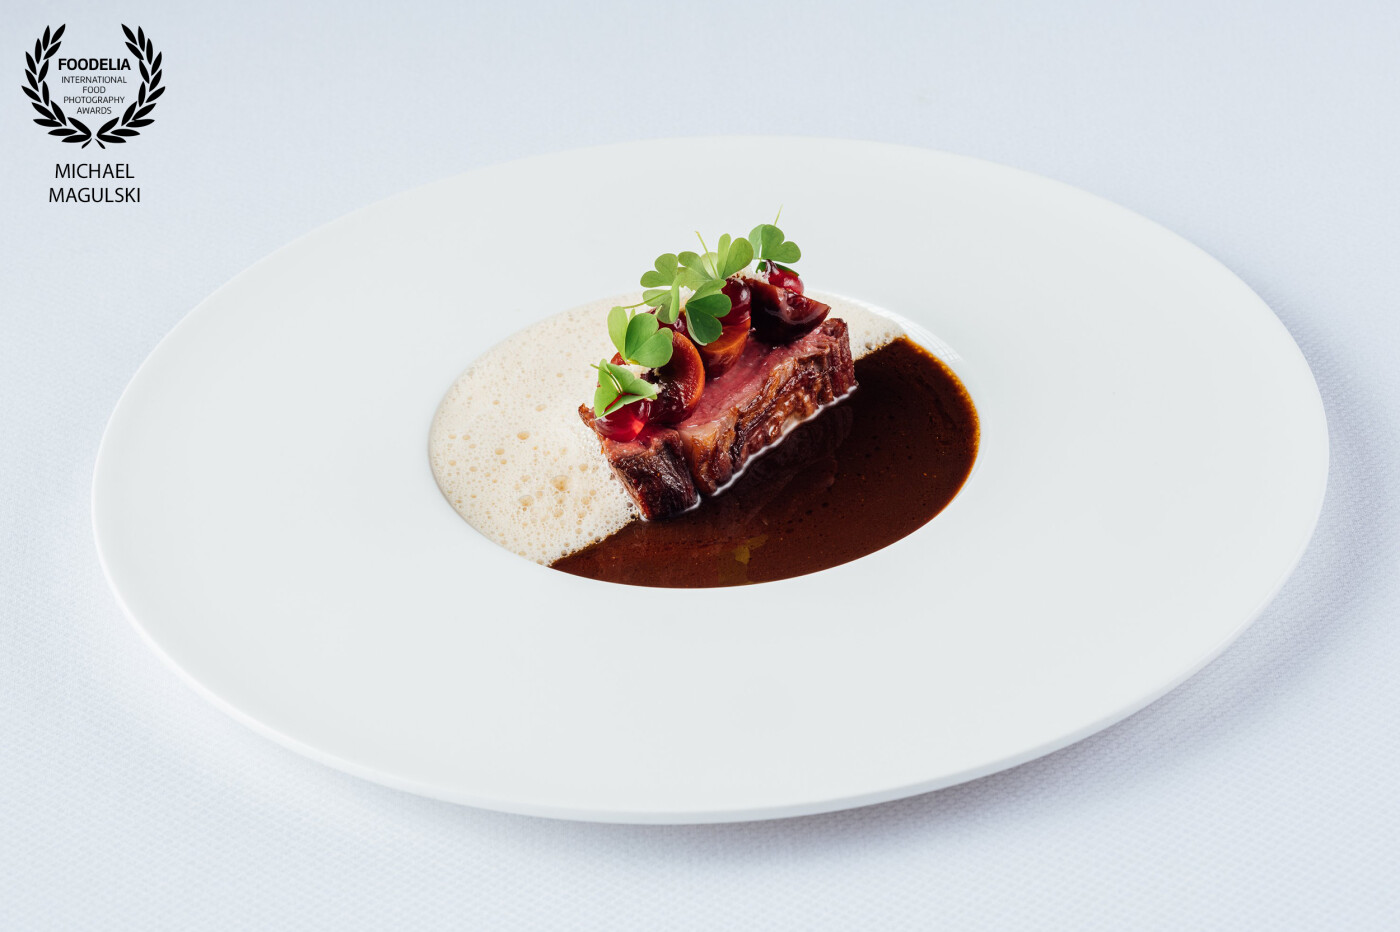 Star chef Felix Gabel from the North Sea island of Sylt has done his magic again. A beautiful braised piece of beef, with a ying and yang sauce.<br />
Ready